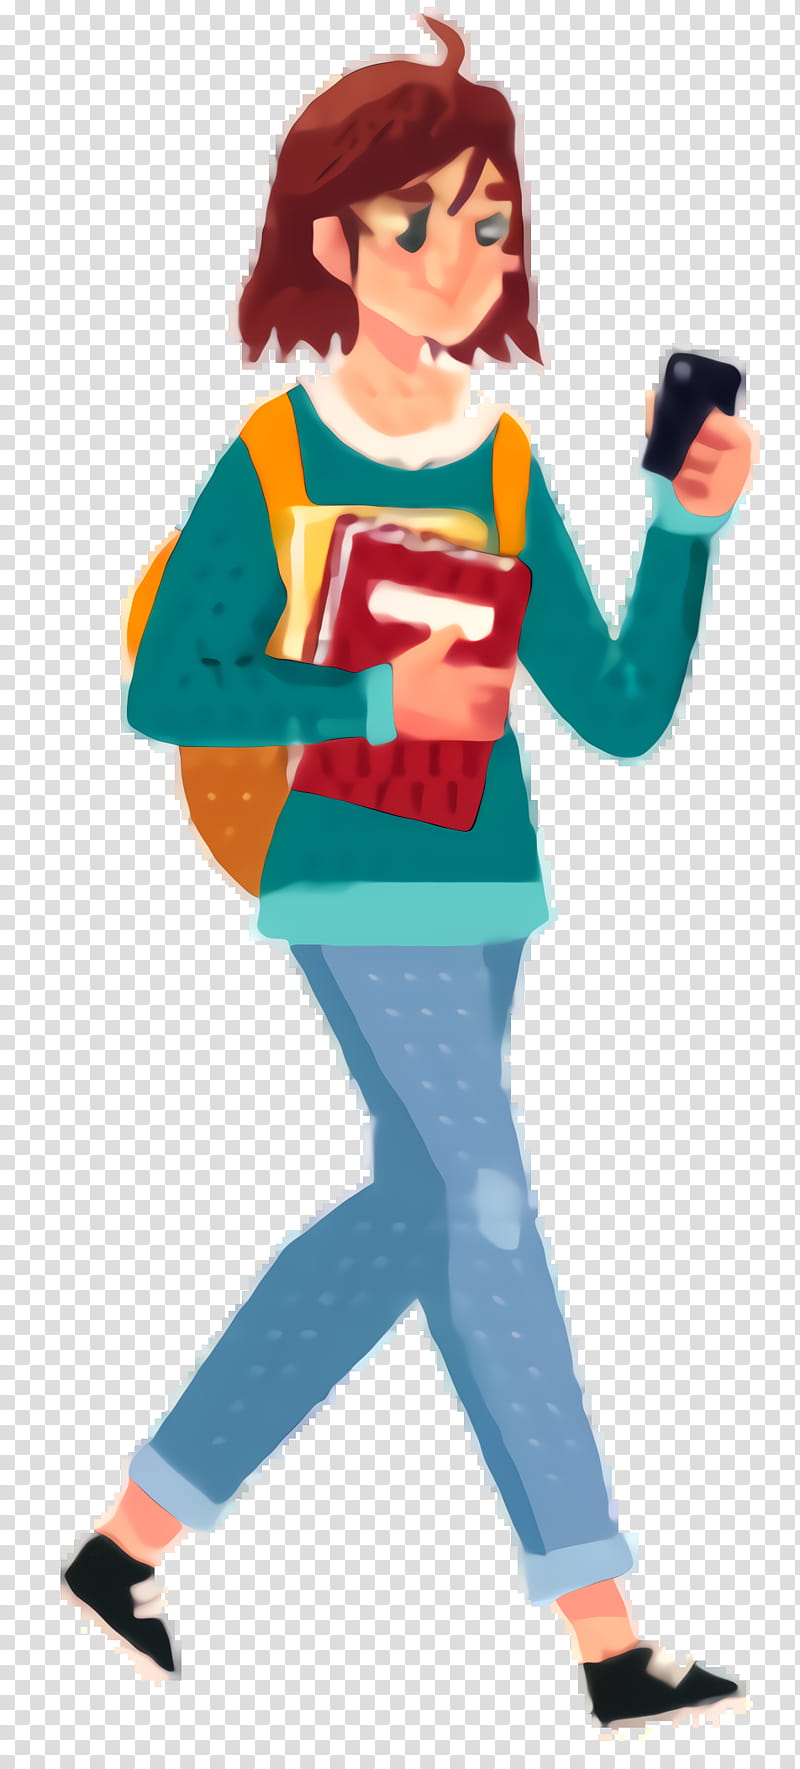 School Illustration, Student, School
, College Student, Cartoon, Learning, Drawing, Girl transparent background PNG clipart